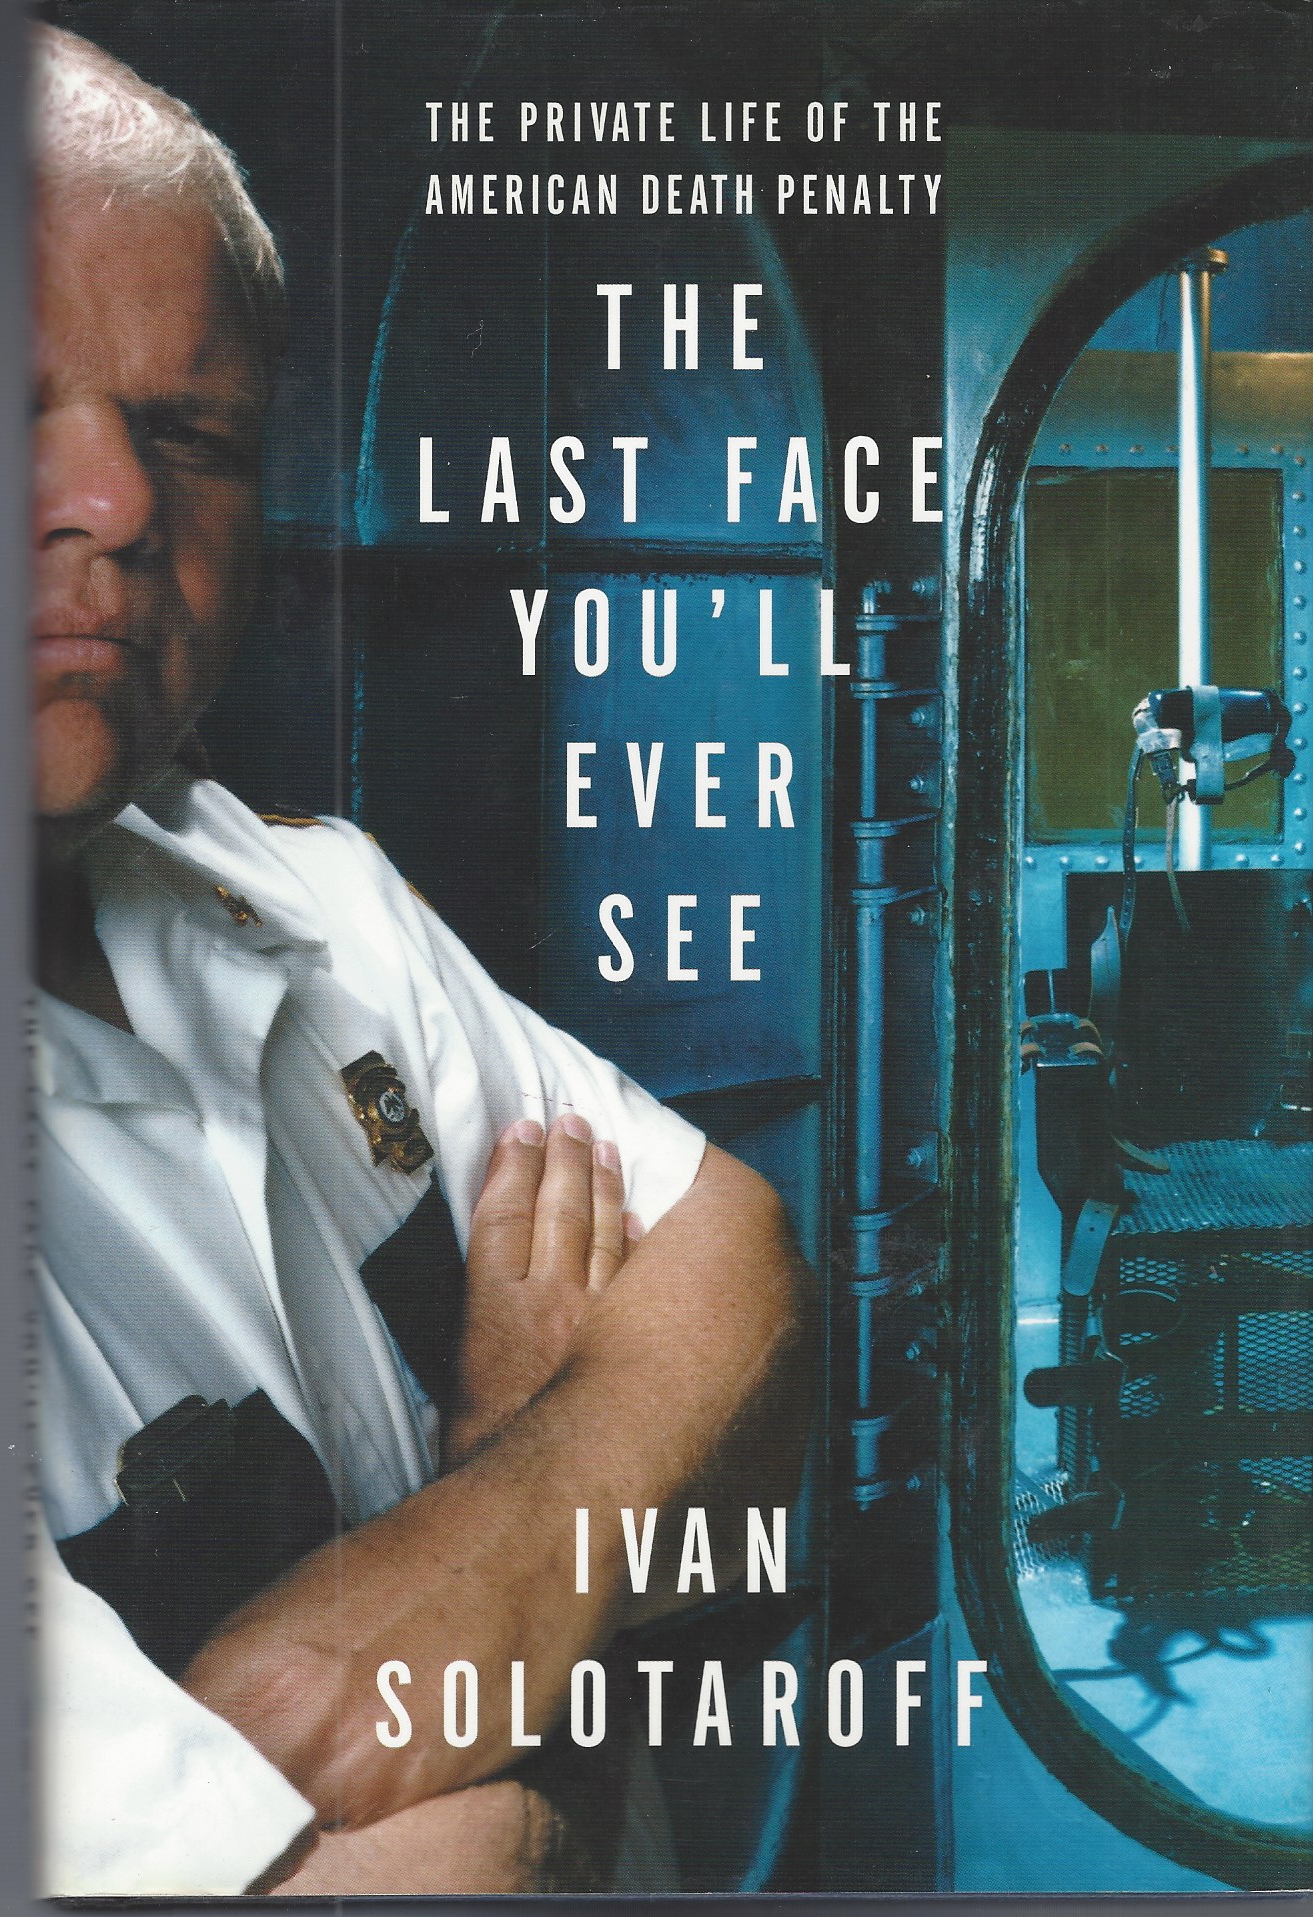 SOLOTAROFF IVAN - Last Face You 'LL Ever See, the the Private Life of the American Death Penalty